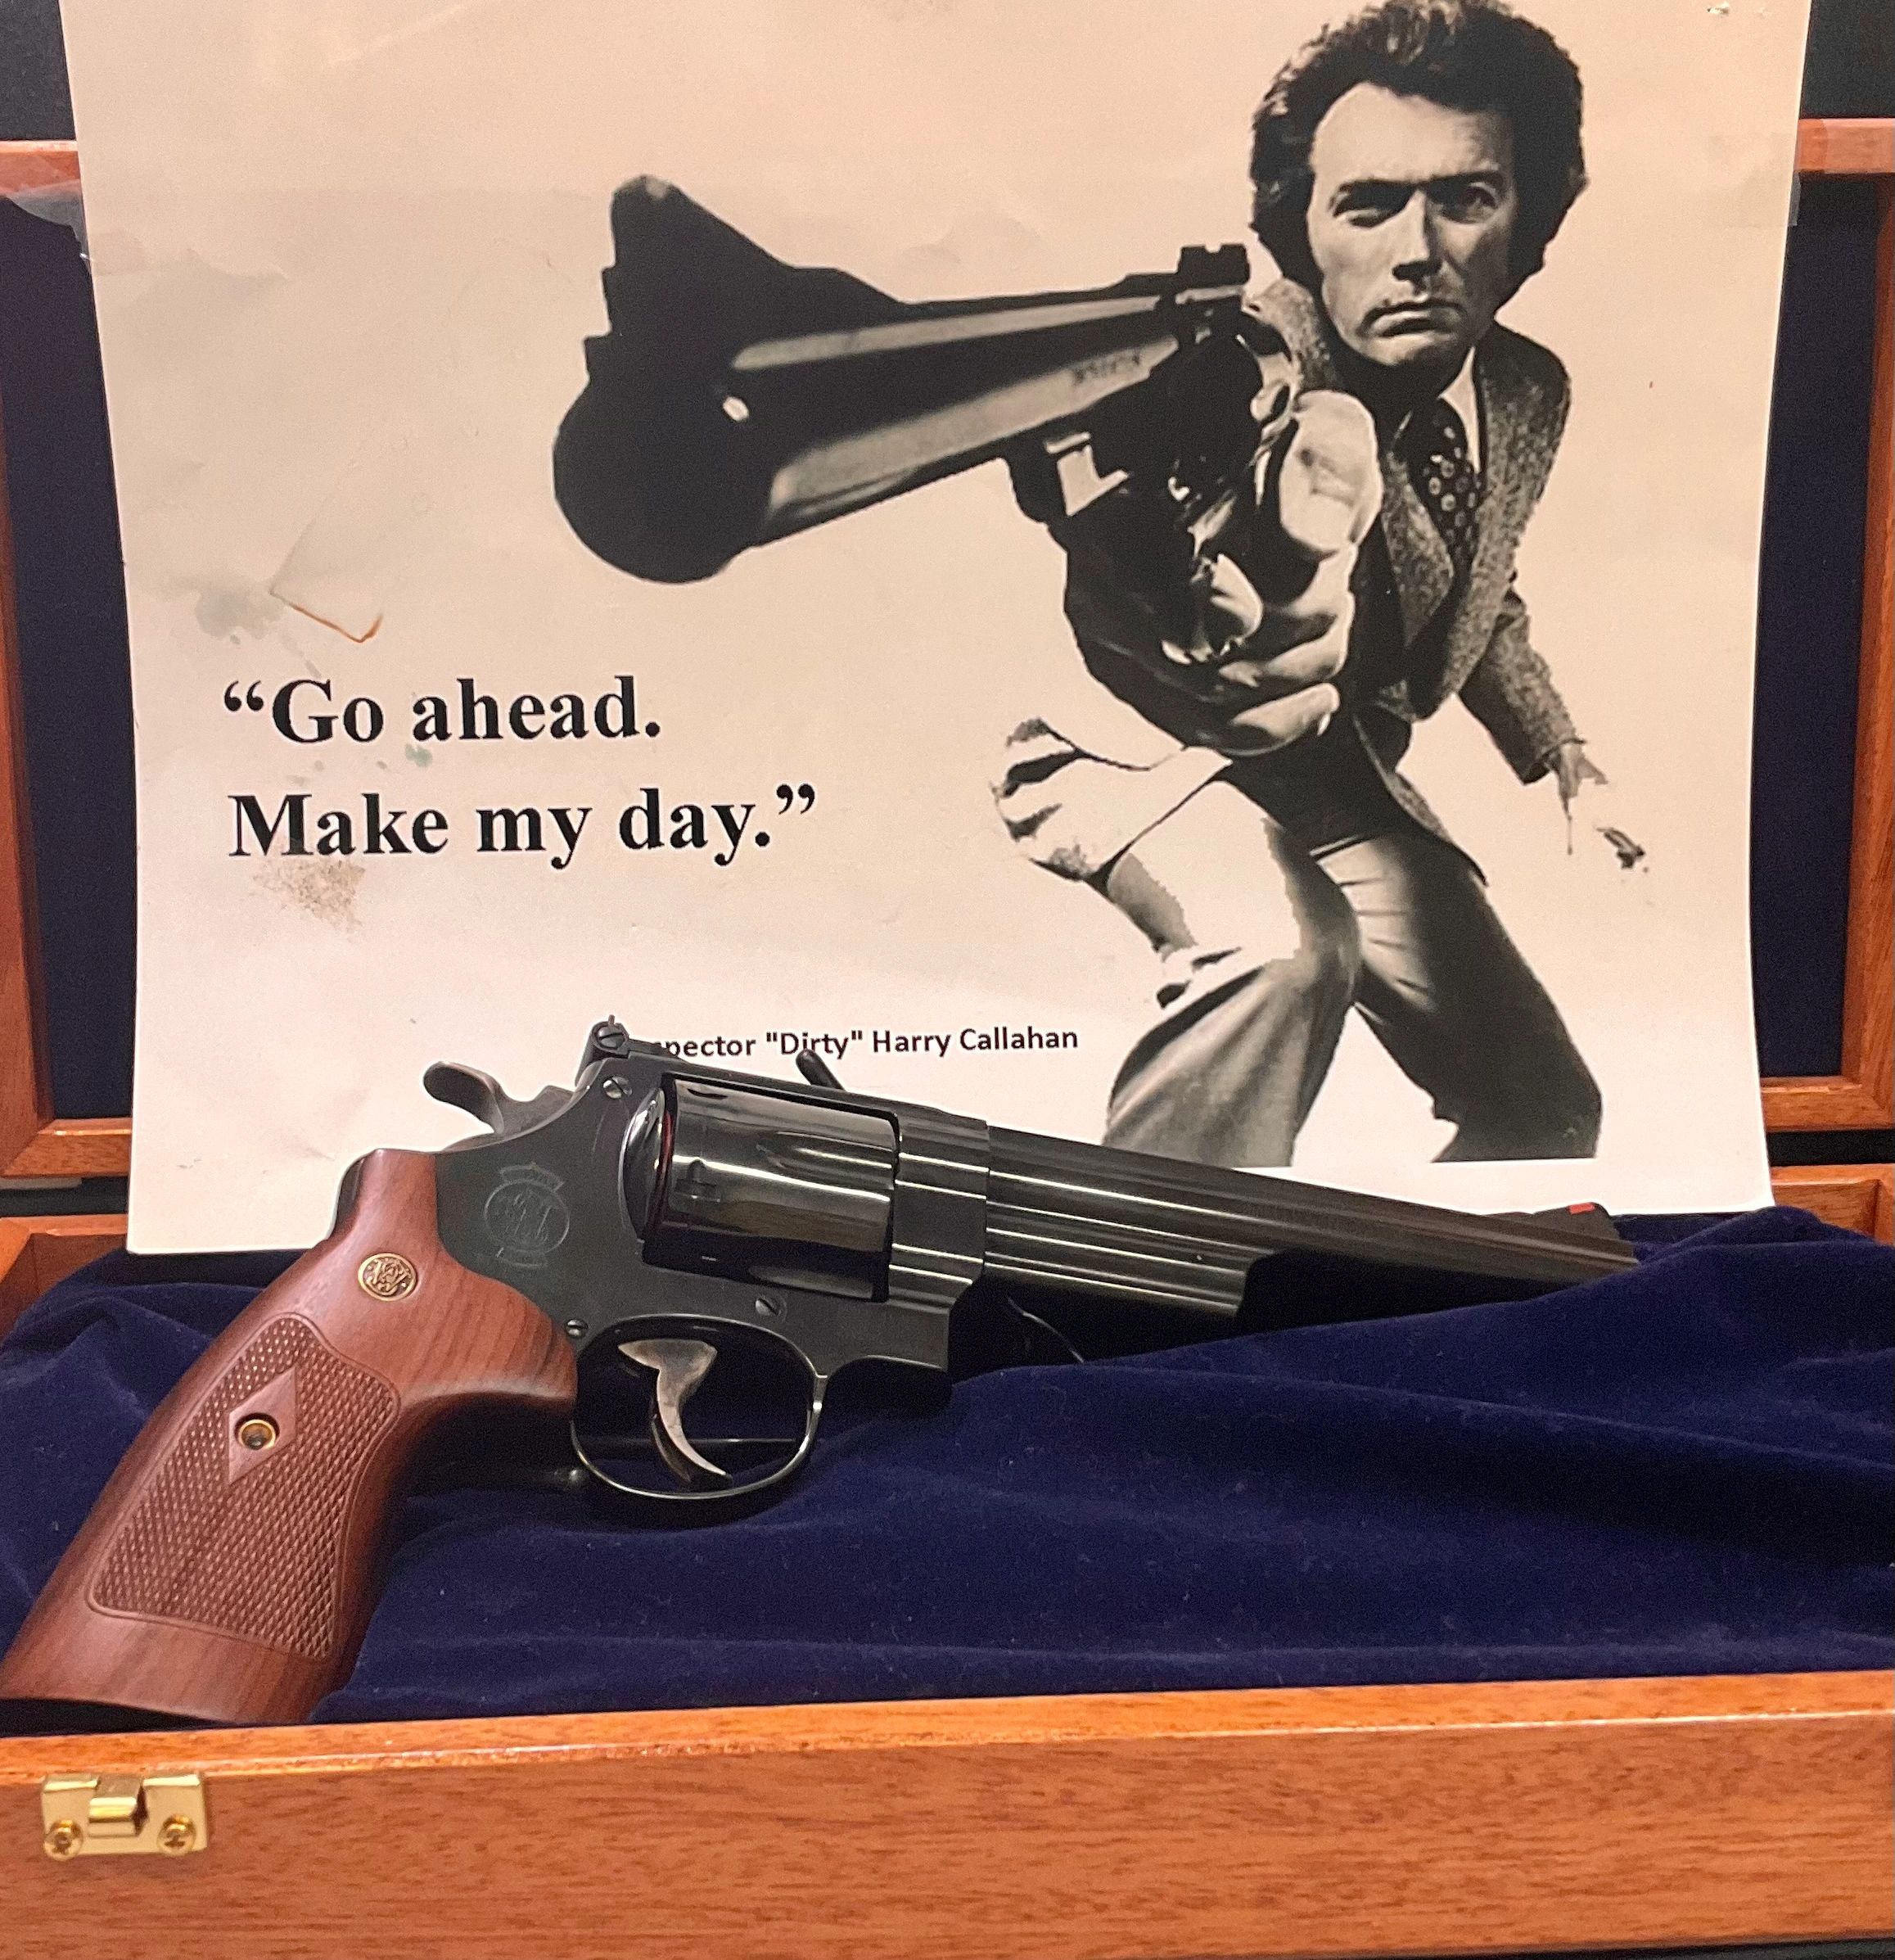 SMITH & WESSON MODEL 29-10 “Dirty Harry” $1400
Stop in or Call for Purchase